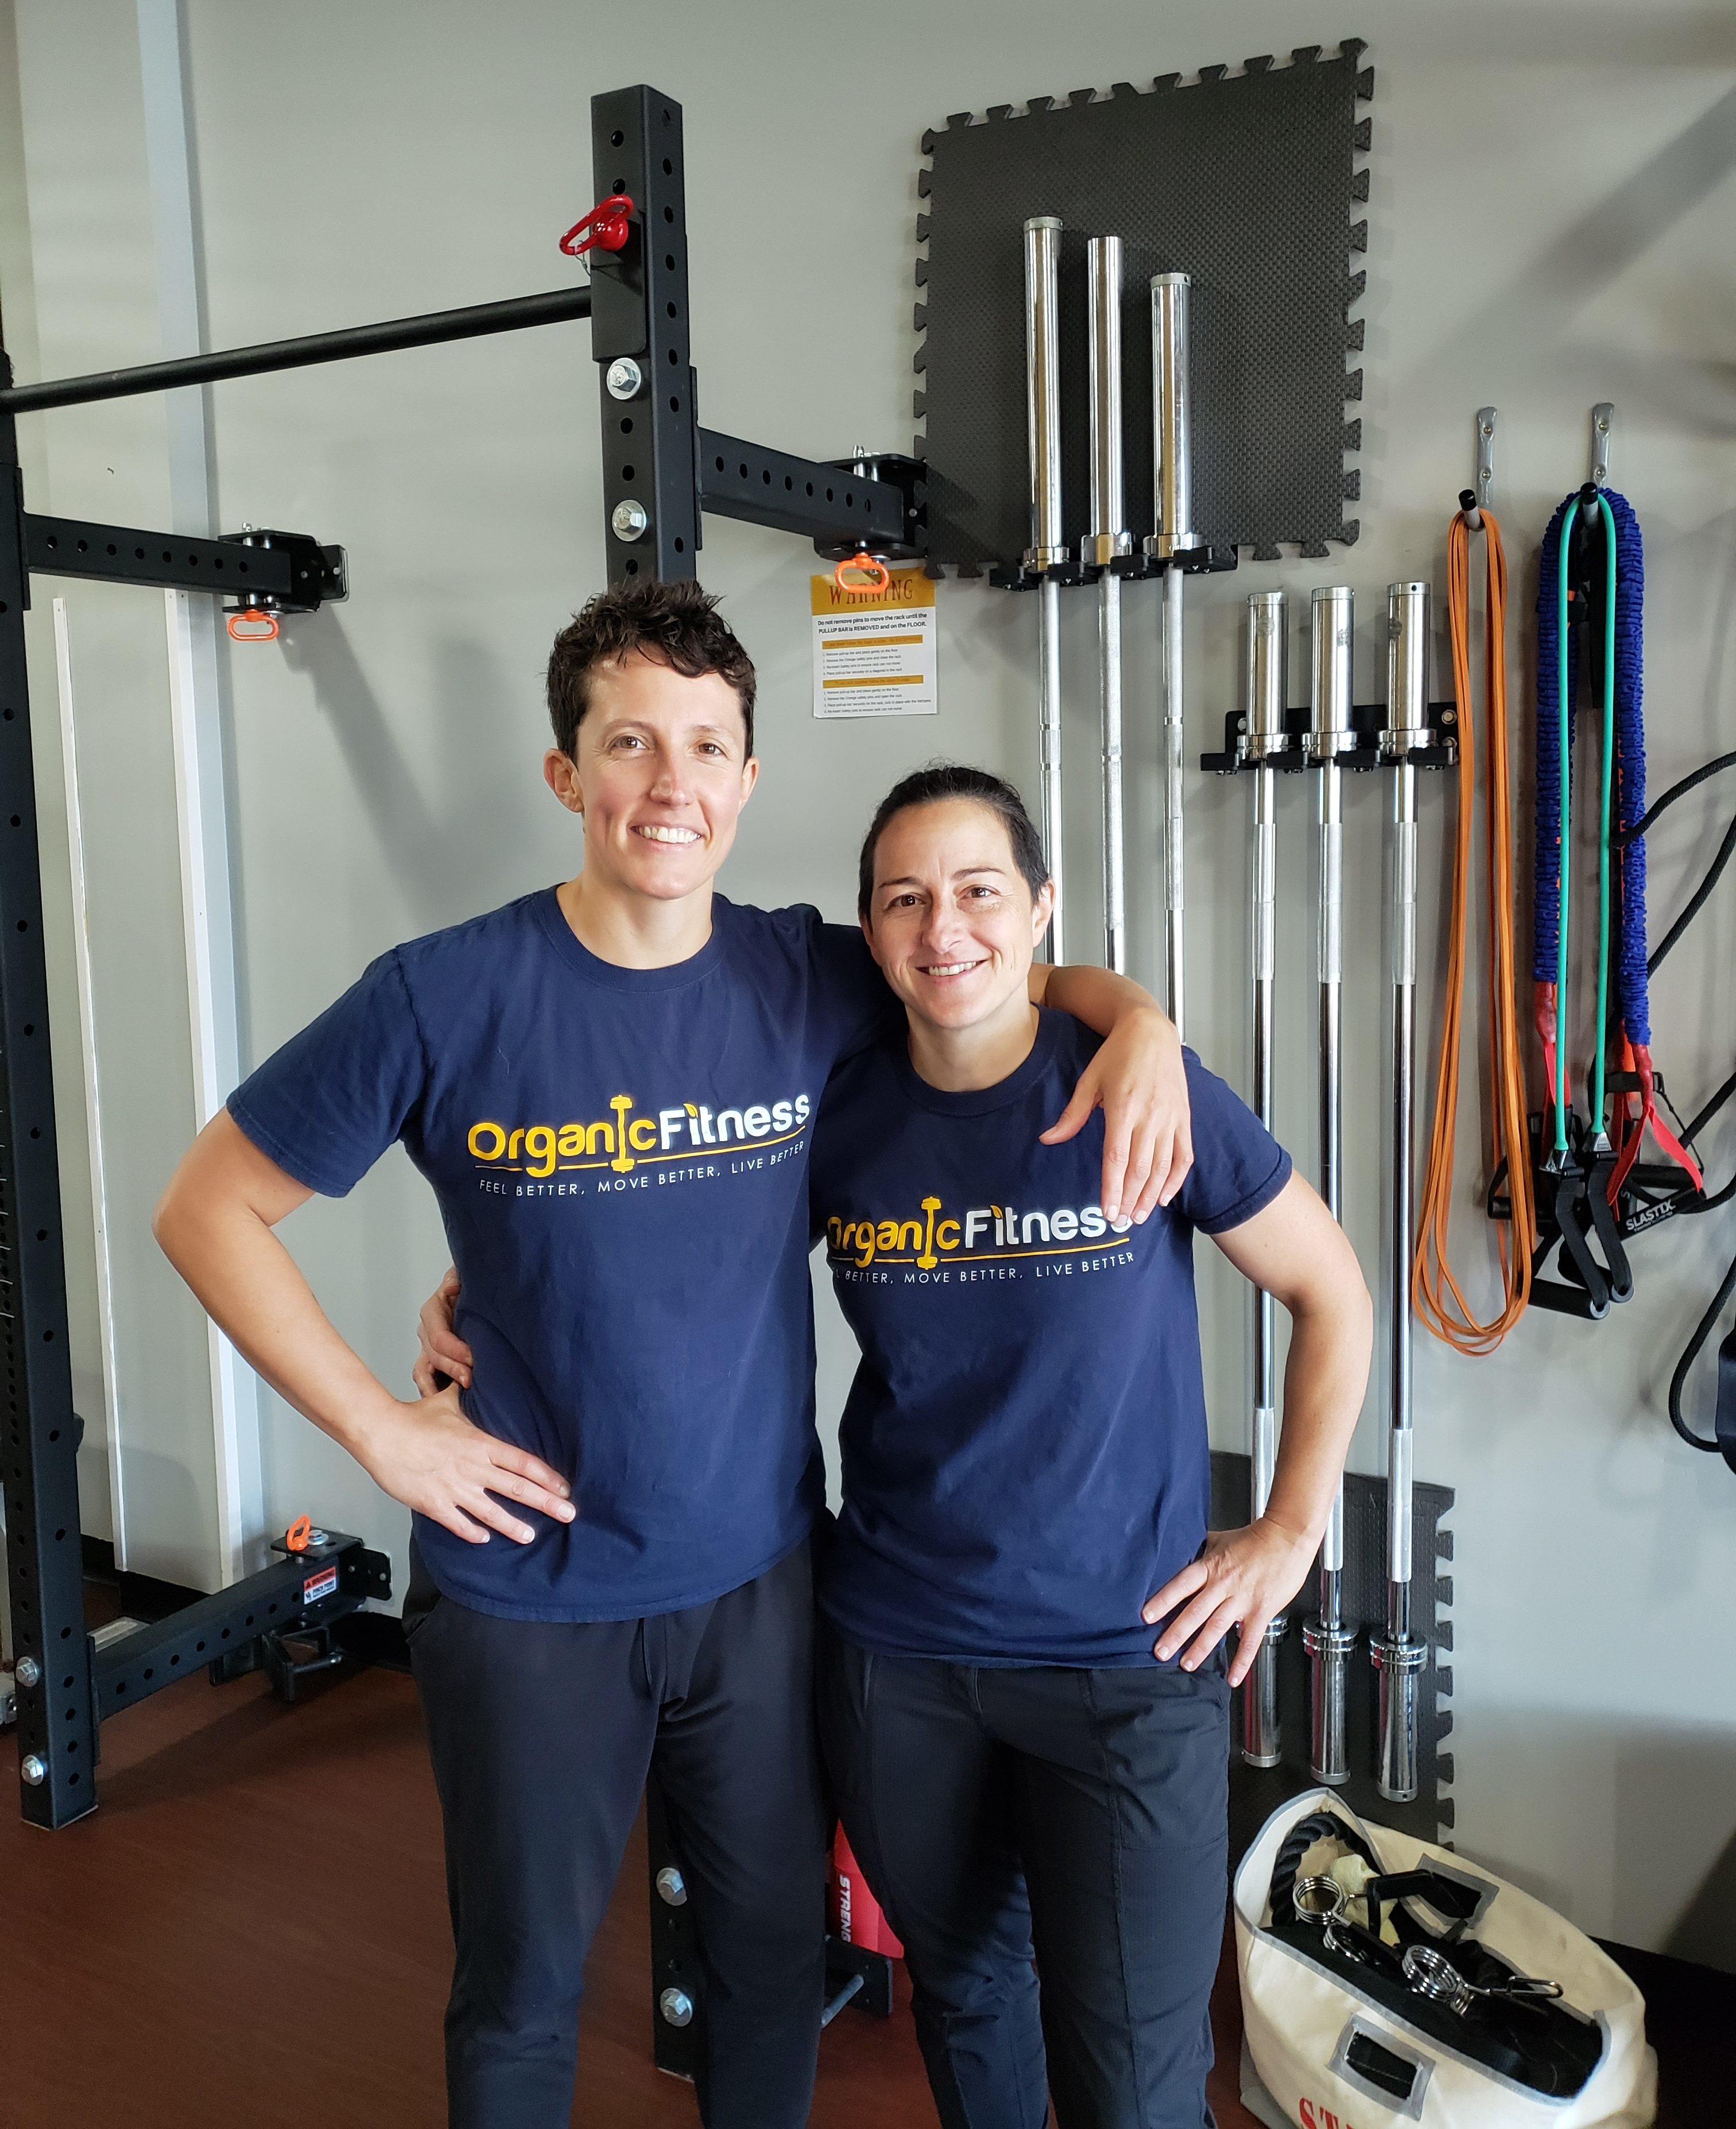 Meghan Crutchley and Carrie Goldkopf, Owners and Coaches of Organic Fitness, LLC